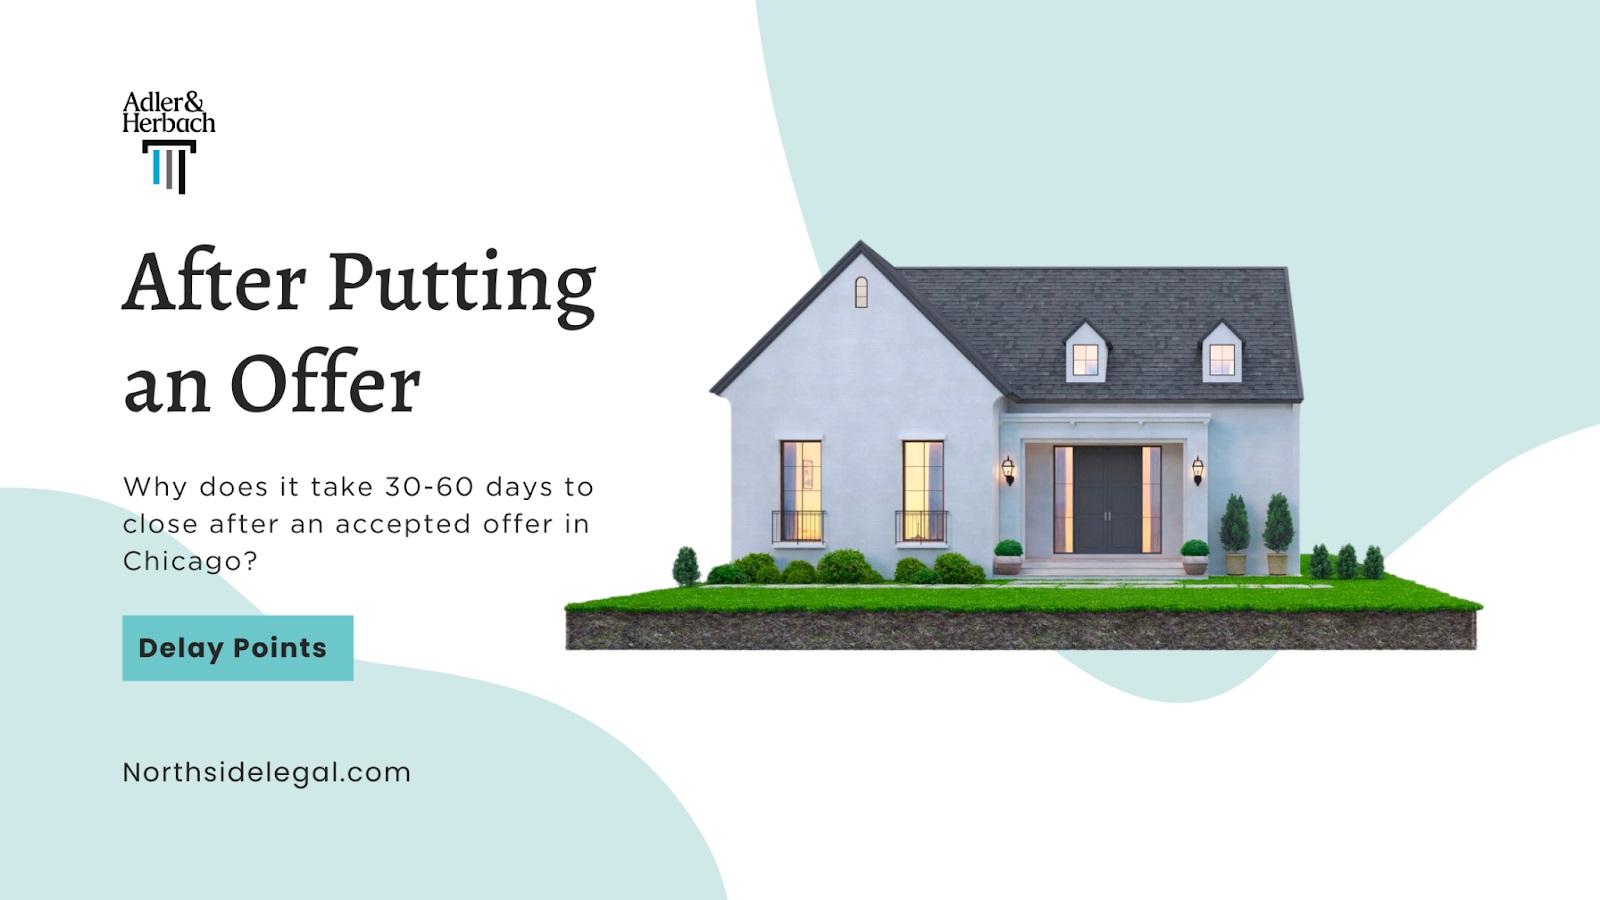 How Long Does It Take To Close After Putting An Offer On A House?